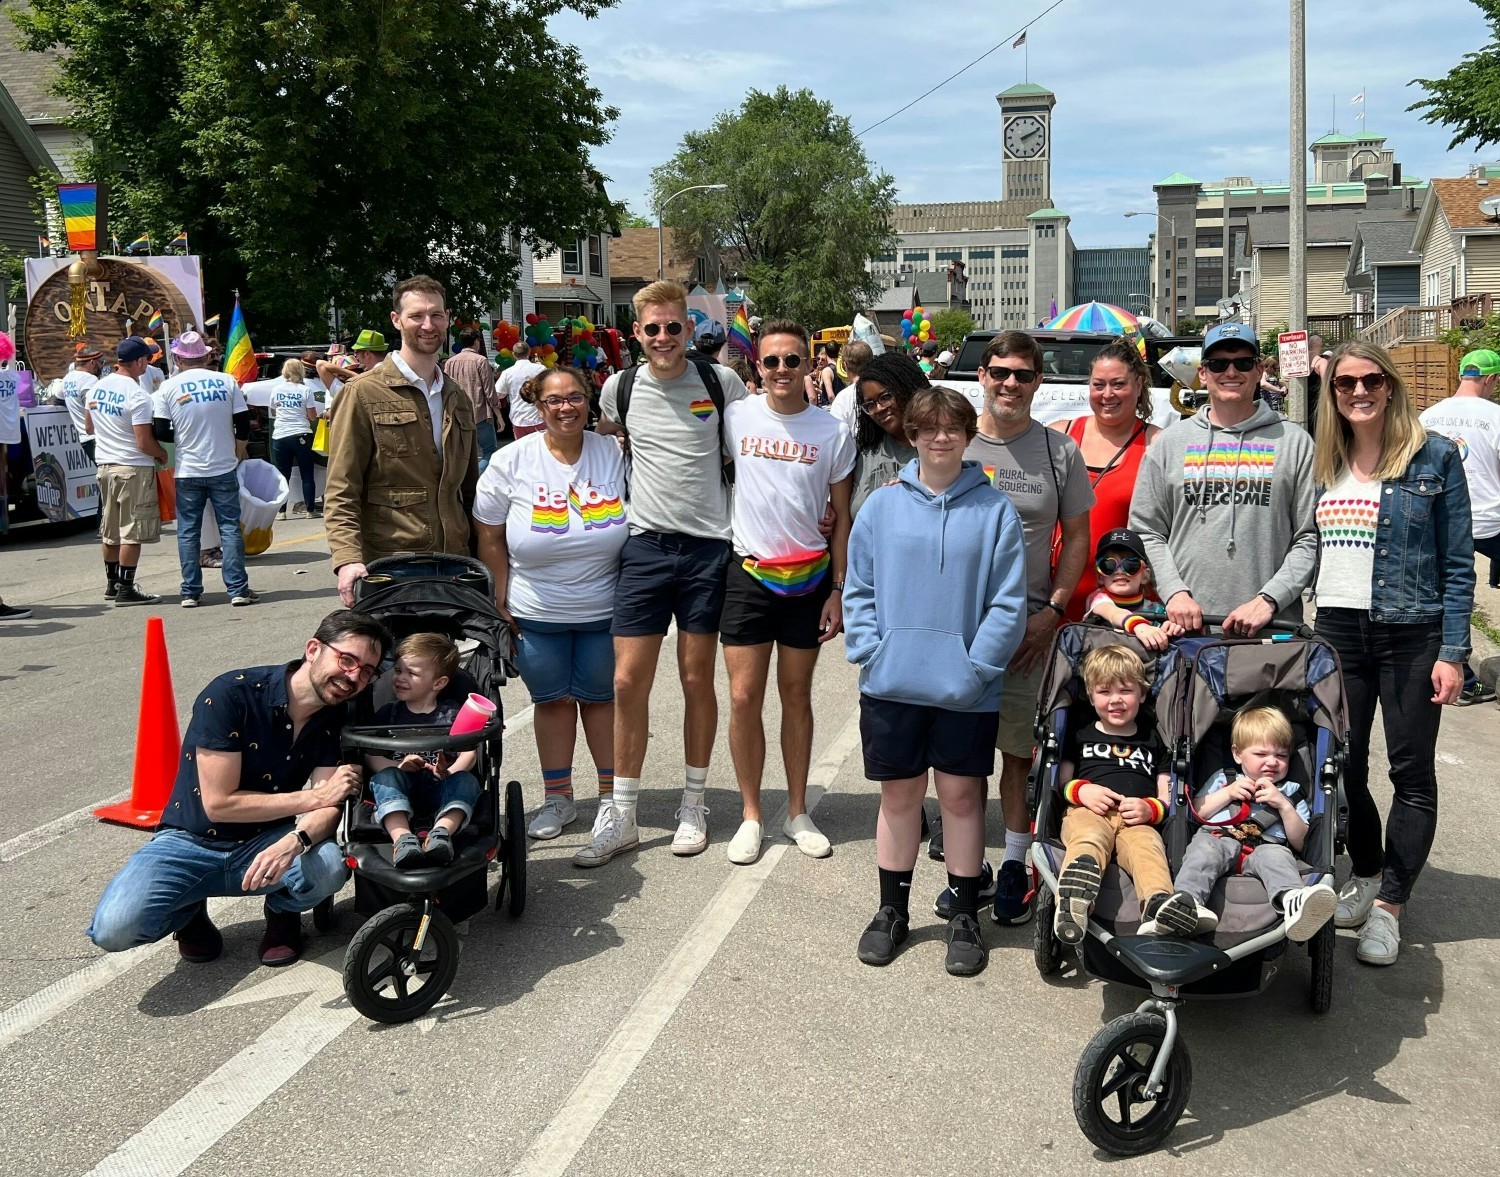 Colleagues Attending Milwaukee Pride